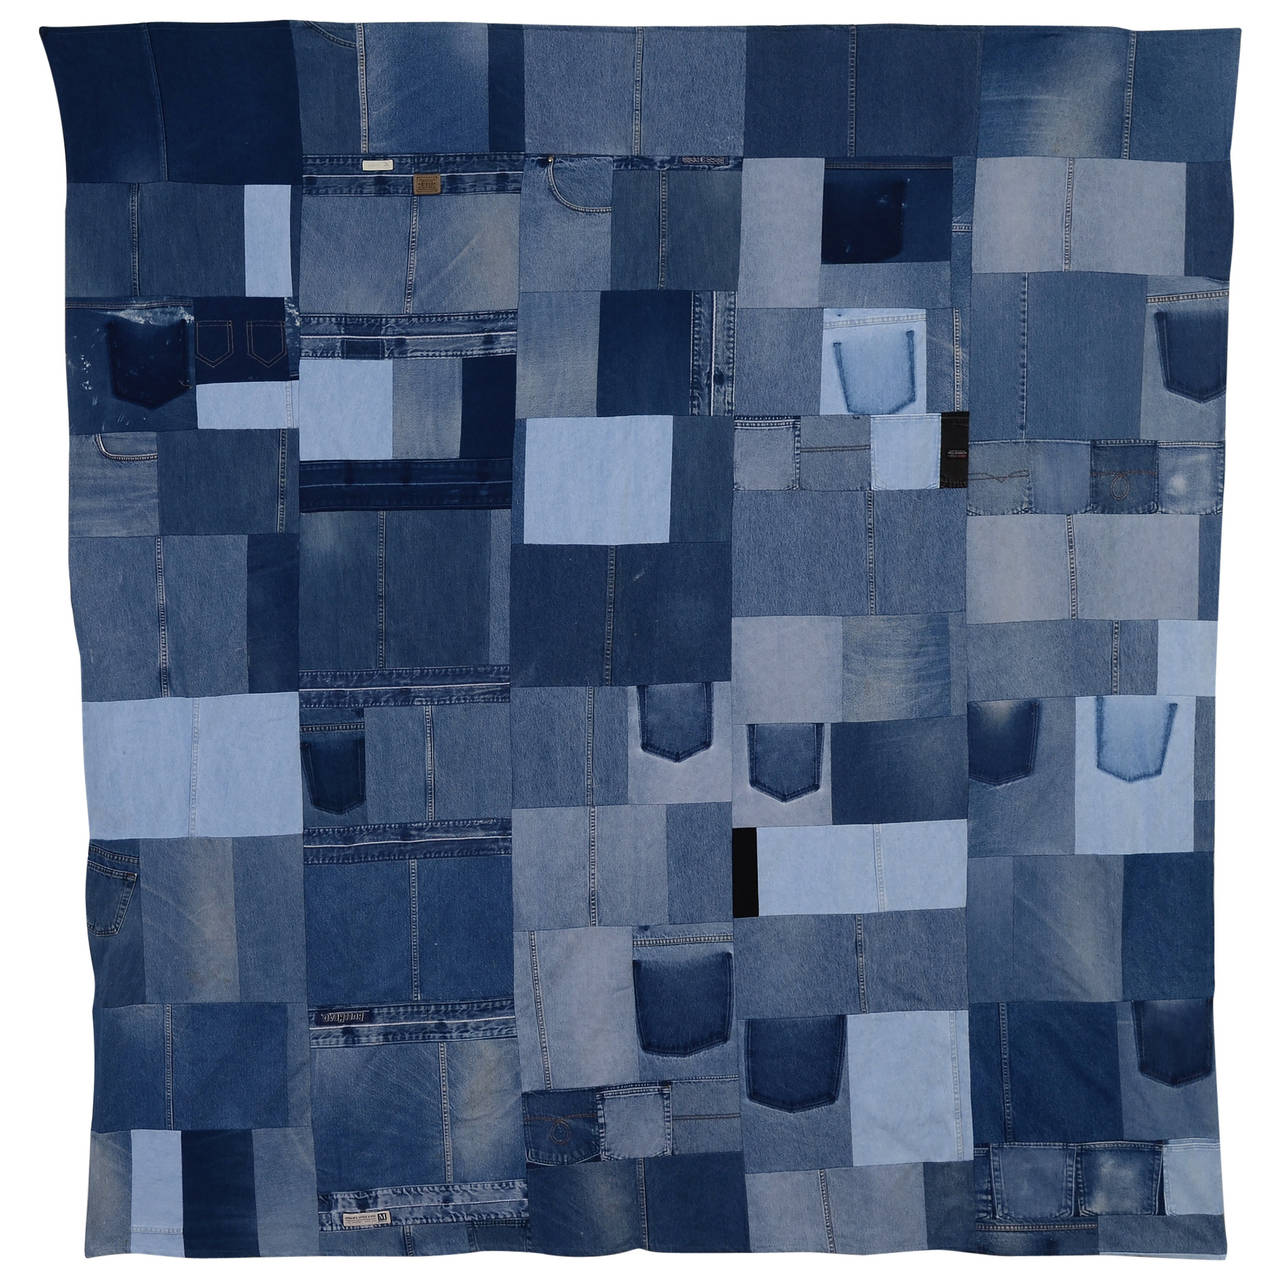 Denim Quilt with Jeans Pockets For Sale at 1stdibs